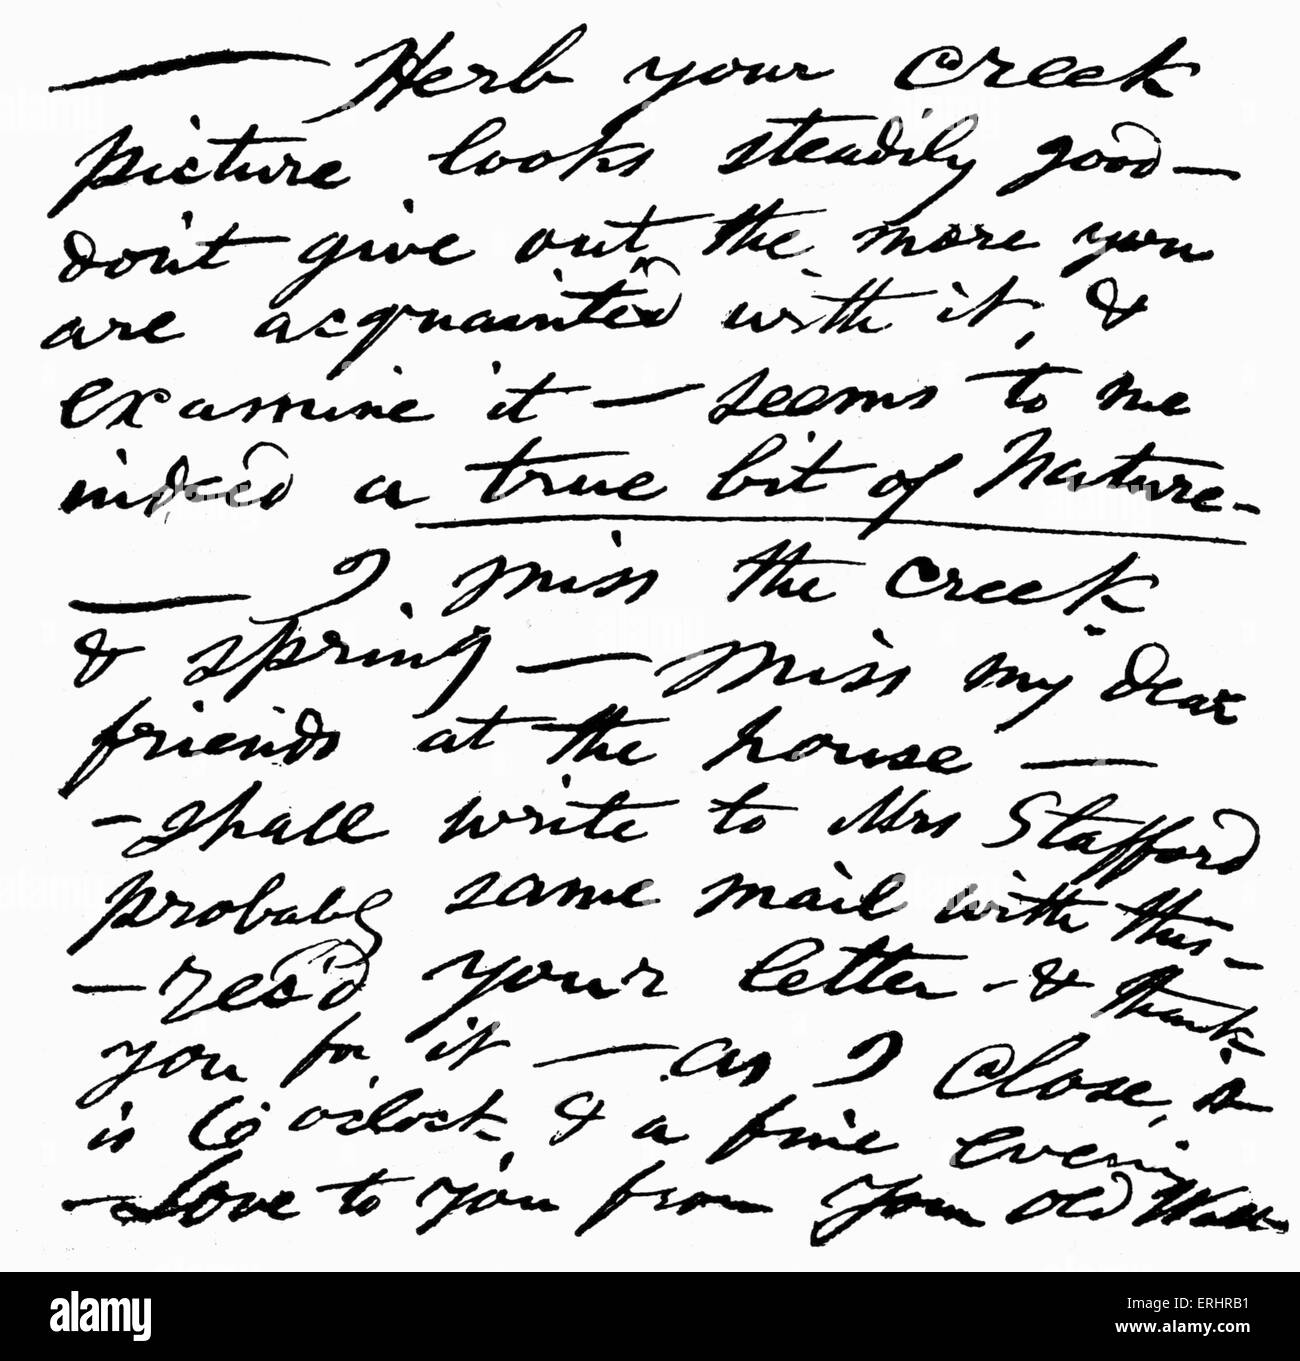 Walt Whitman - Facsimile of part of a letter from Walt Whitman to a young friend called Herb. American poet, essayist, Stock Photo